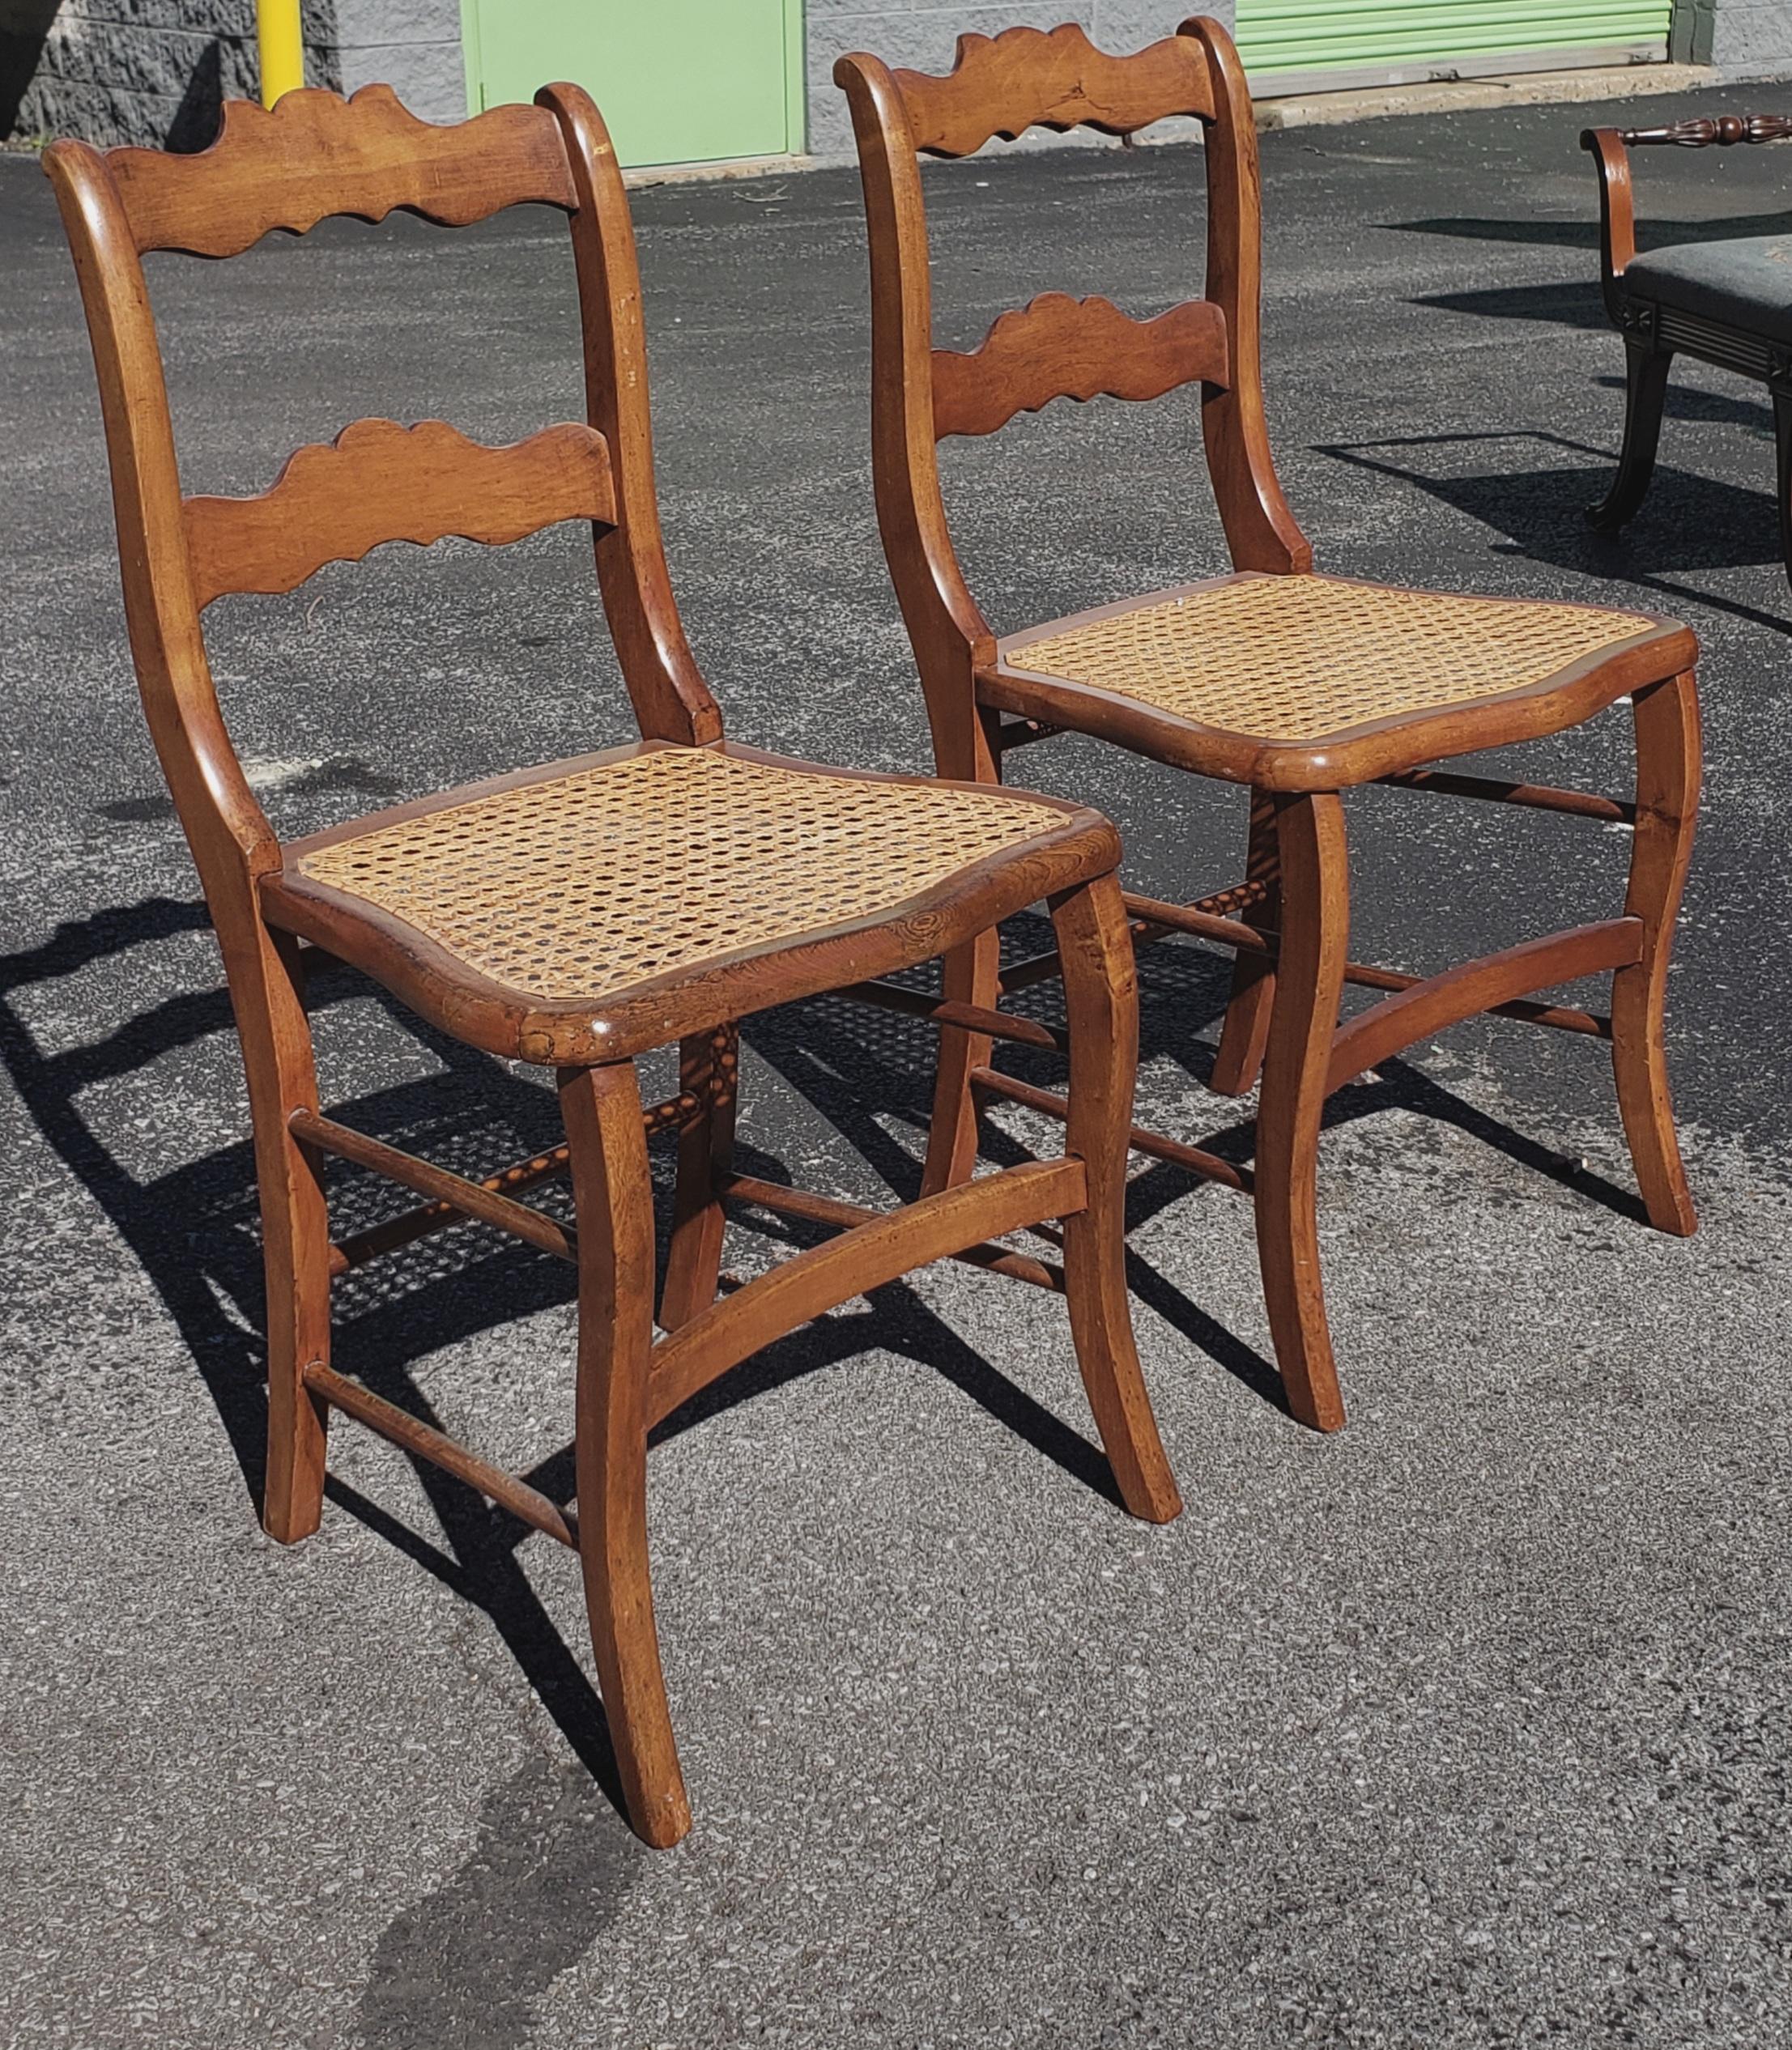 Early American Ladder Back Maple and Cane Seat Chairs, a Pair, circa 1880s In Good Condition For Sale In Germantown, MD